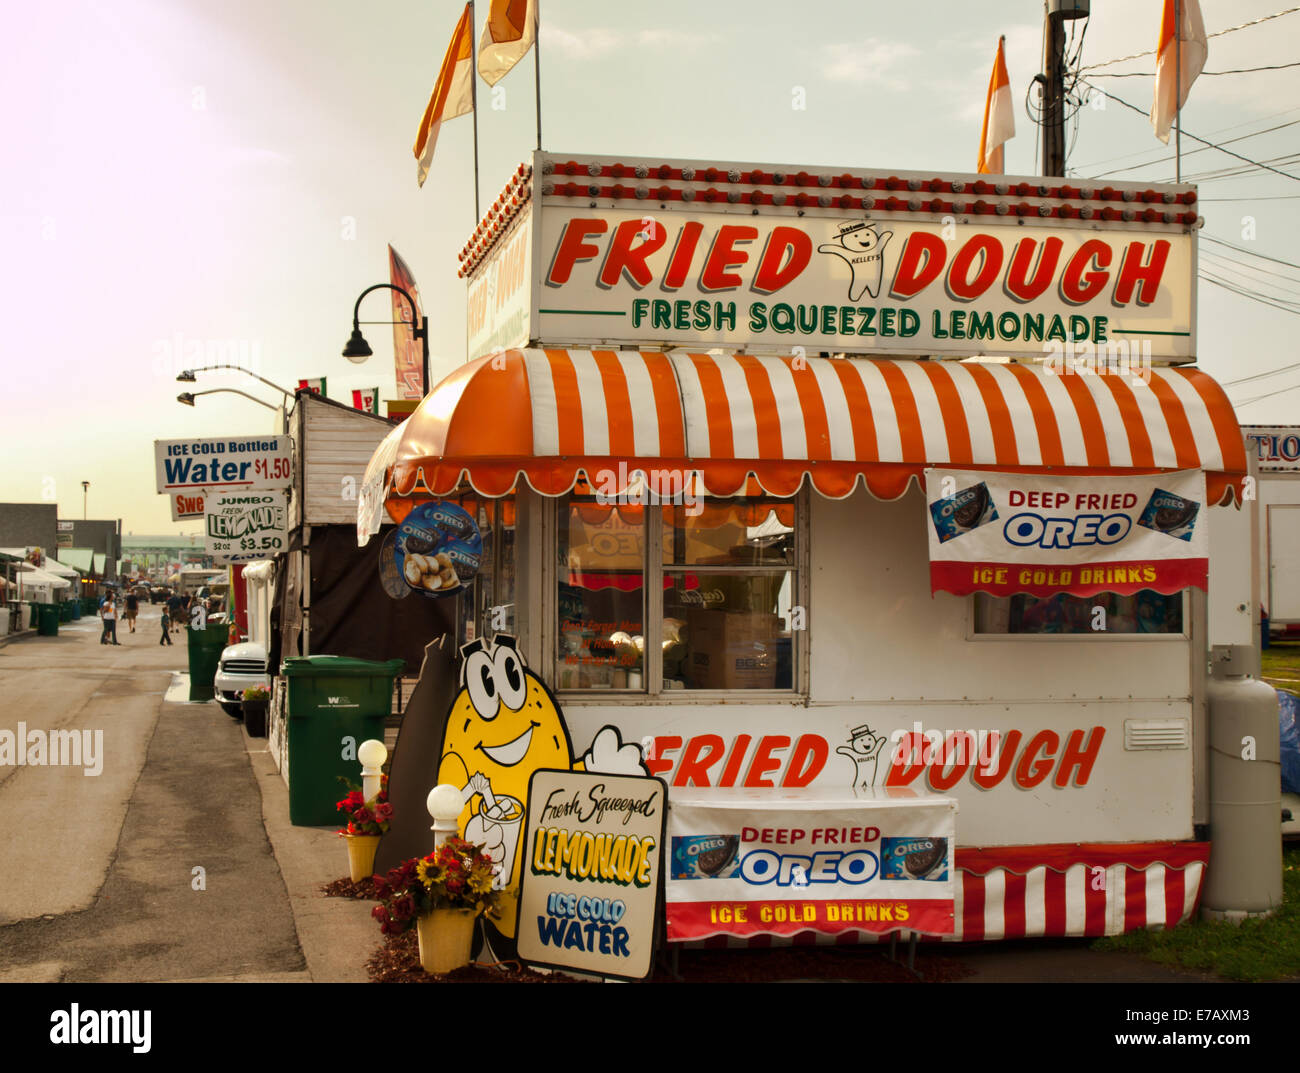 State Fair midway, impasto fritto stand Foto Stock